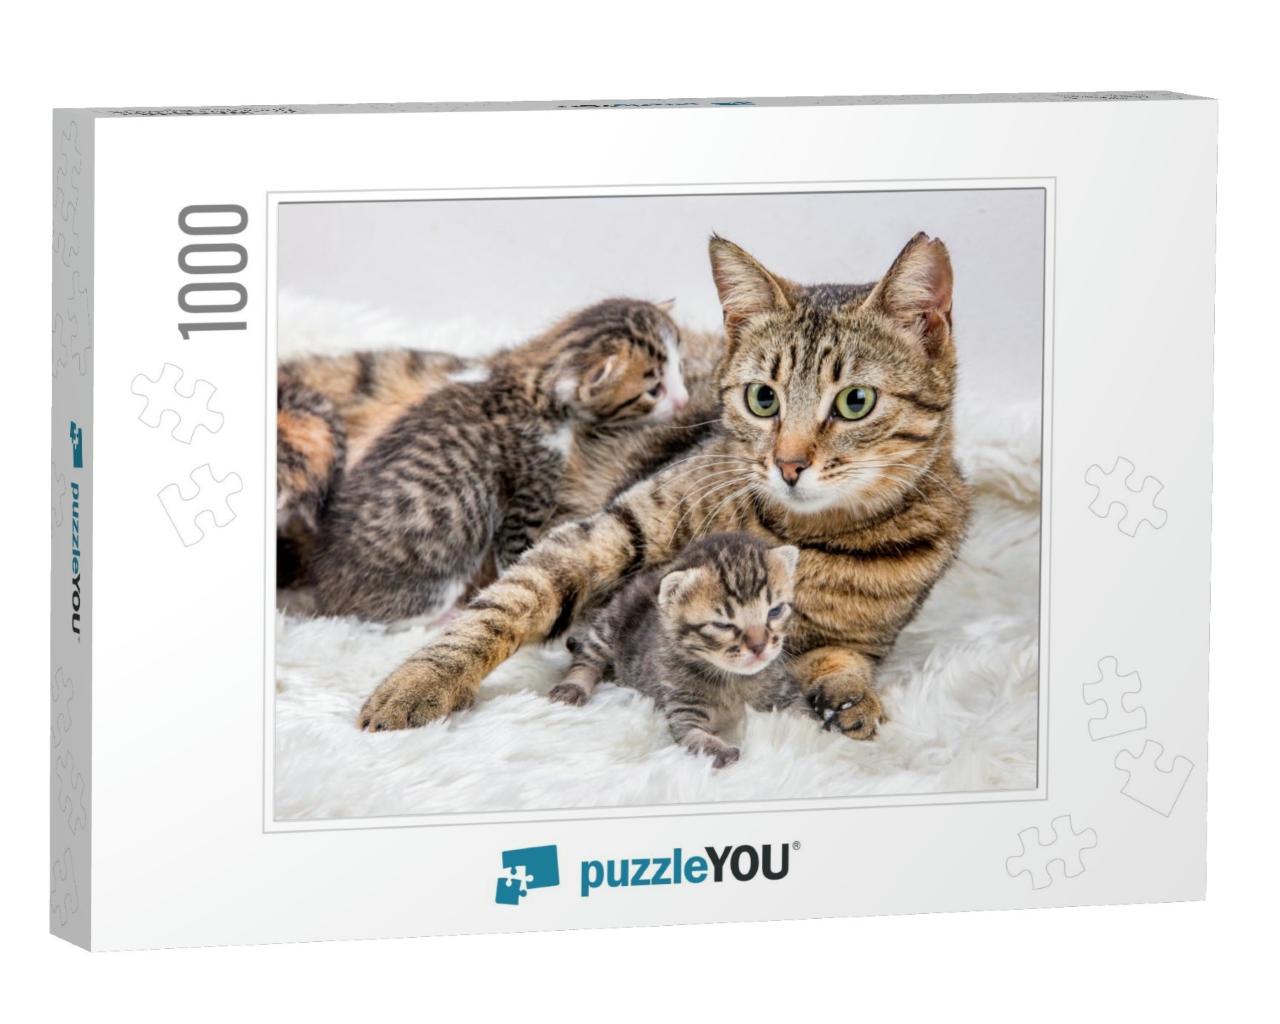 Mom Mother Cat & Baby Cat Kitten... Jigsaw Puzzle with 1000 pieces